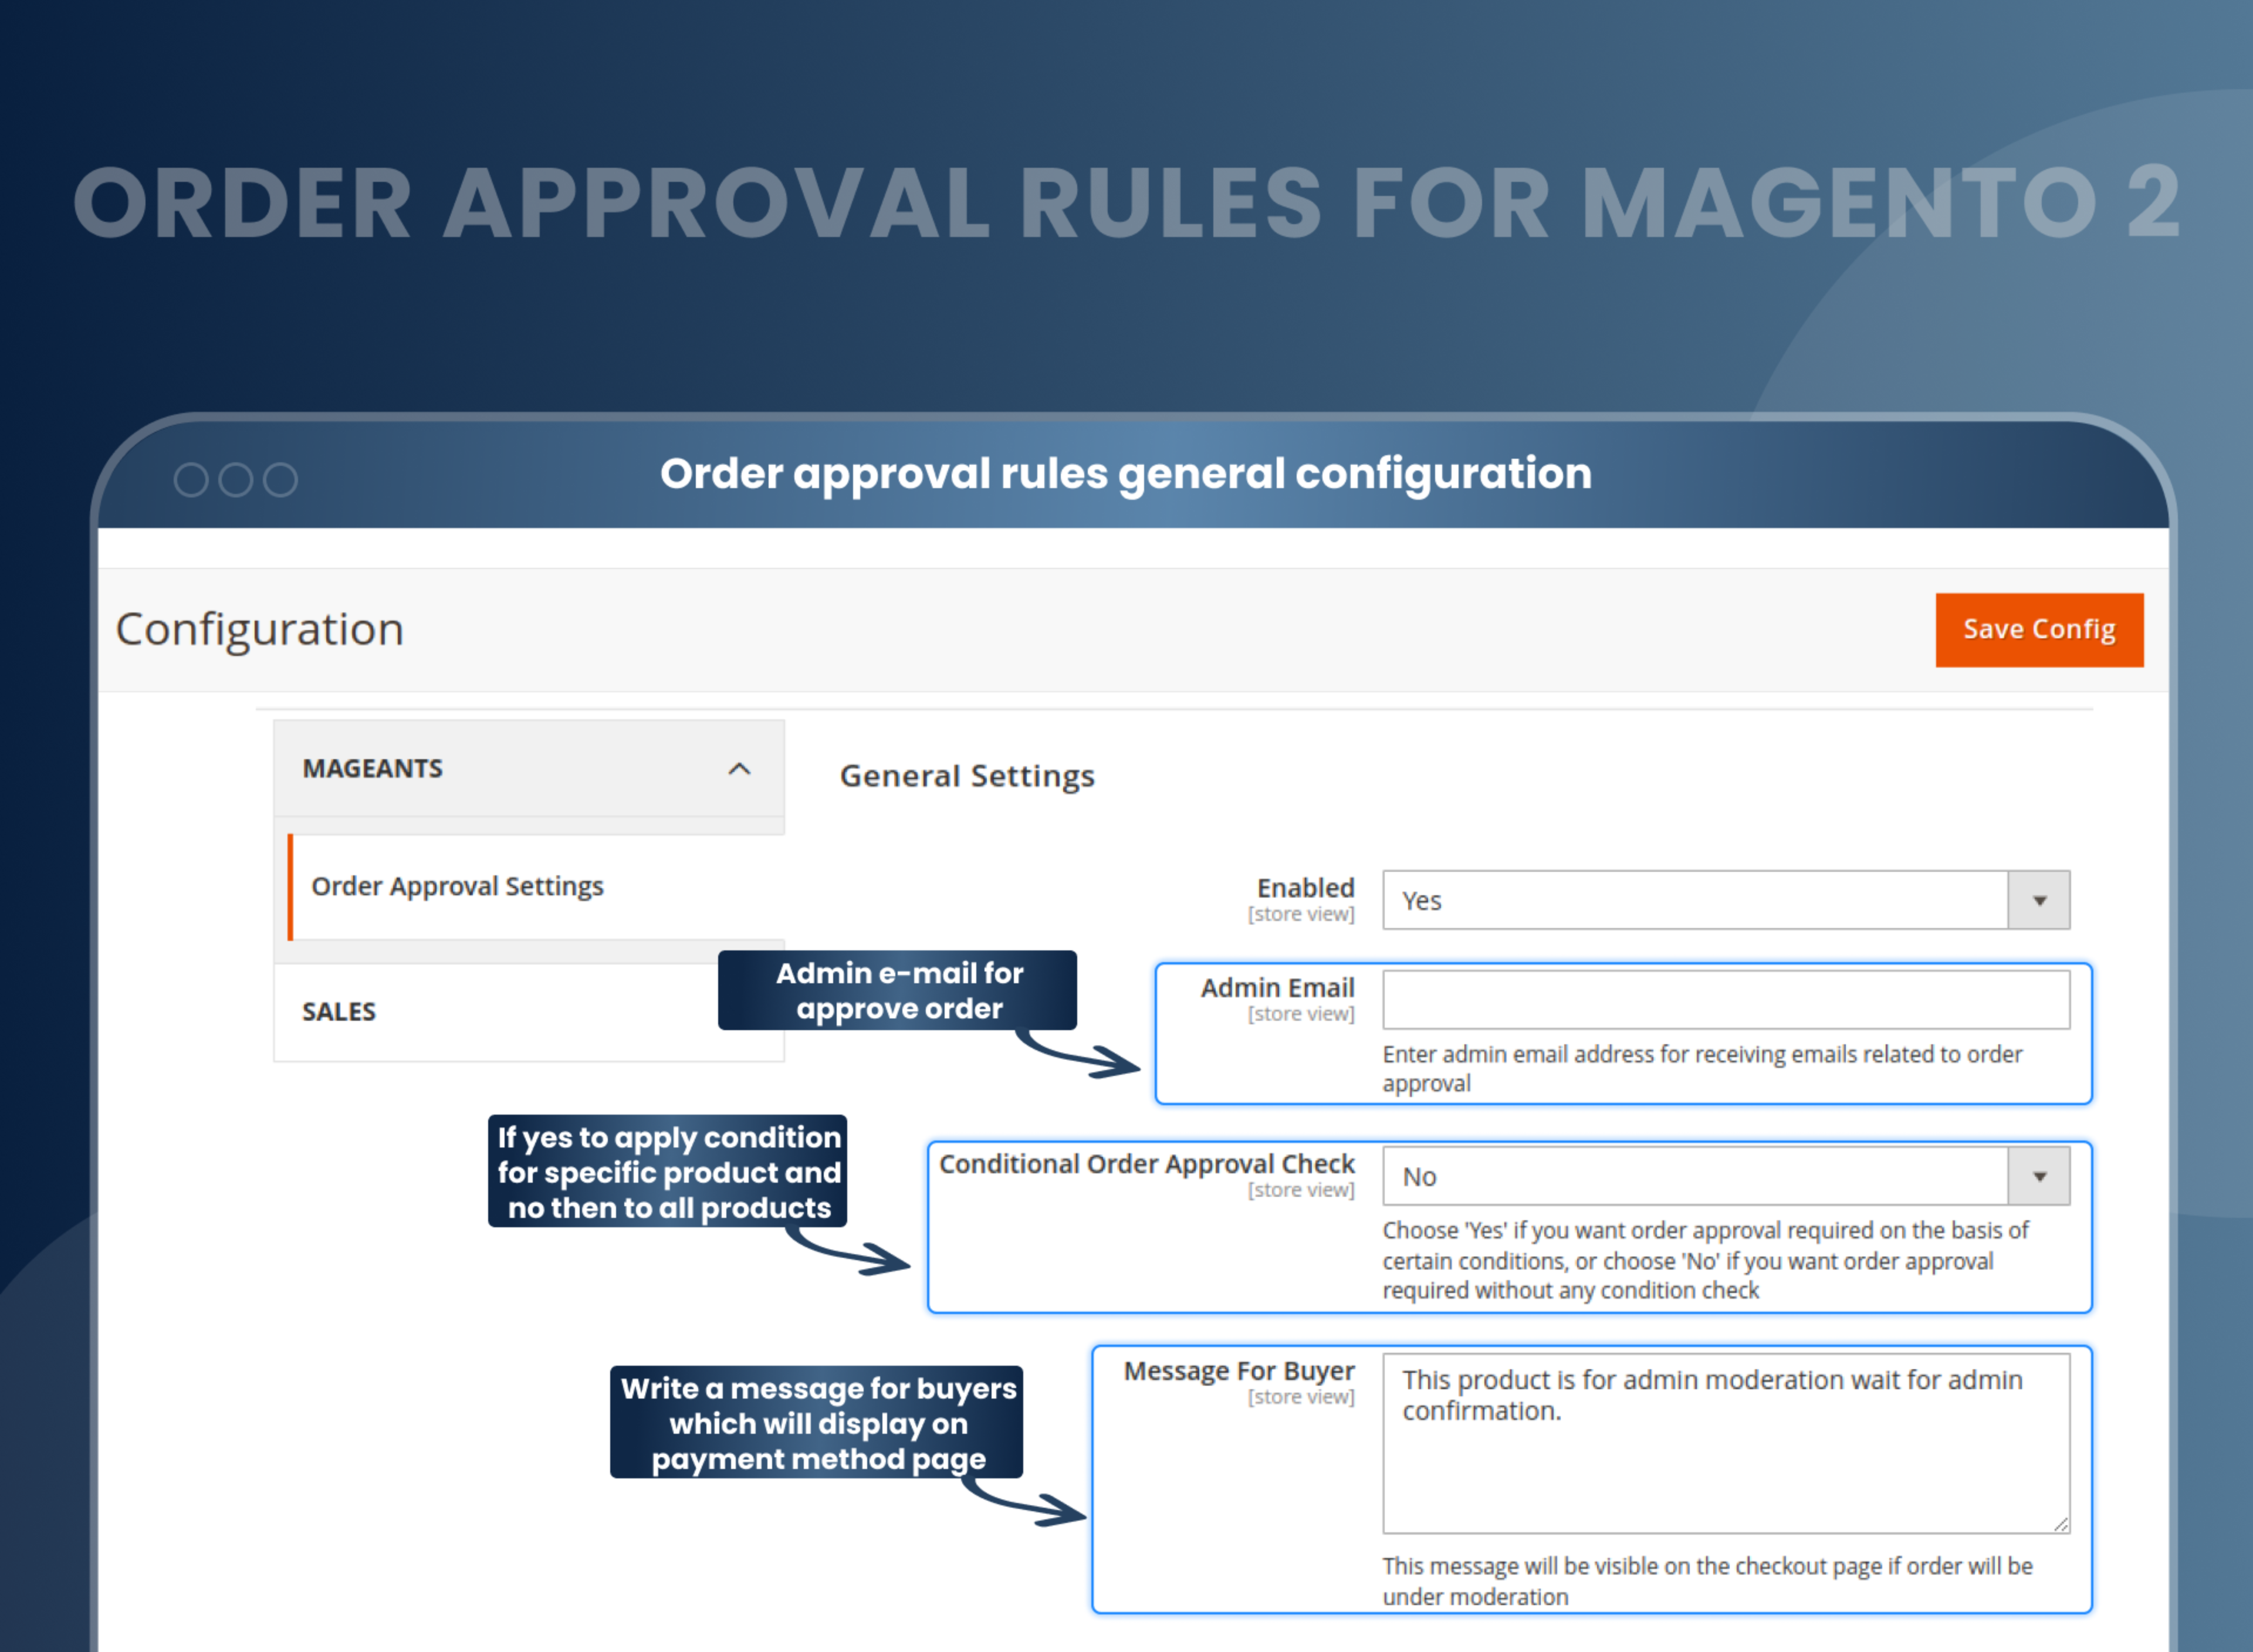 Order approval rules general configuration